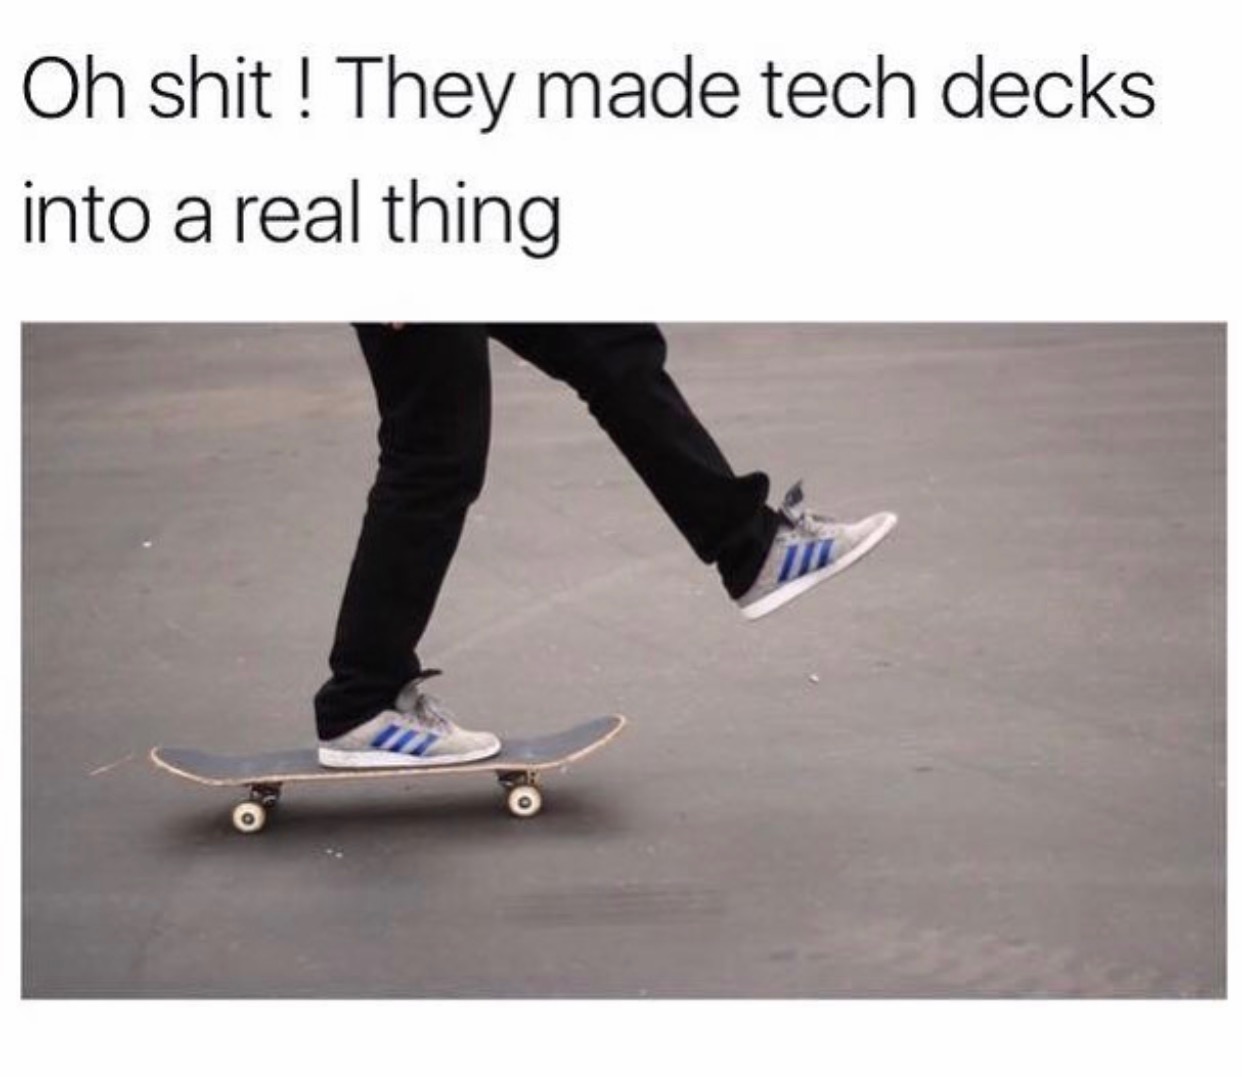 random pic skateboard and rollerblades - Oh shit ! They made tech decks into a real thing